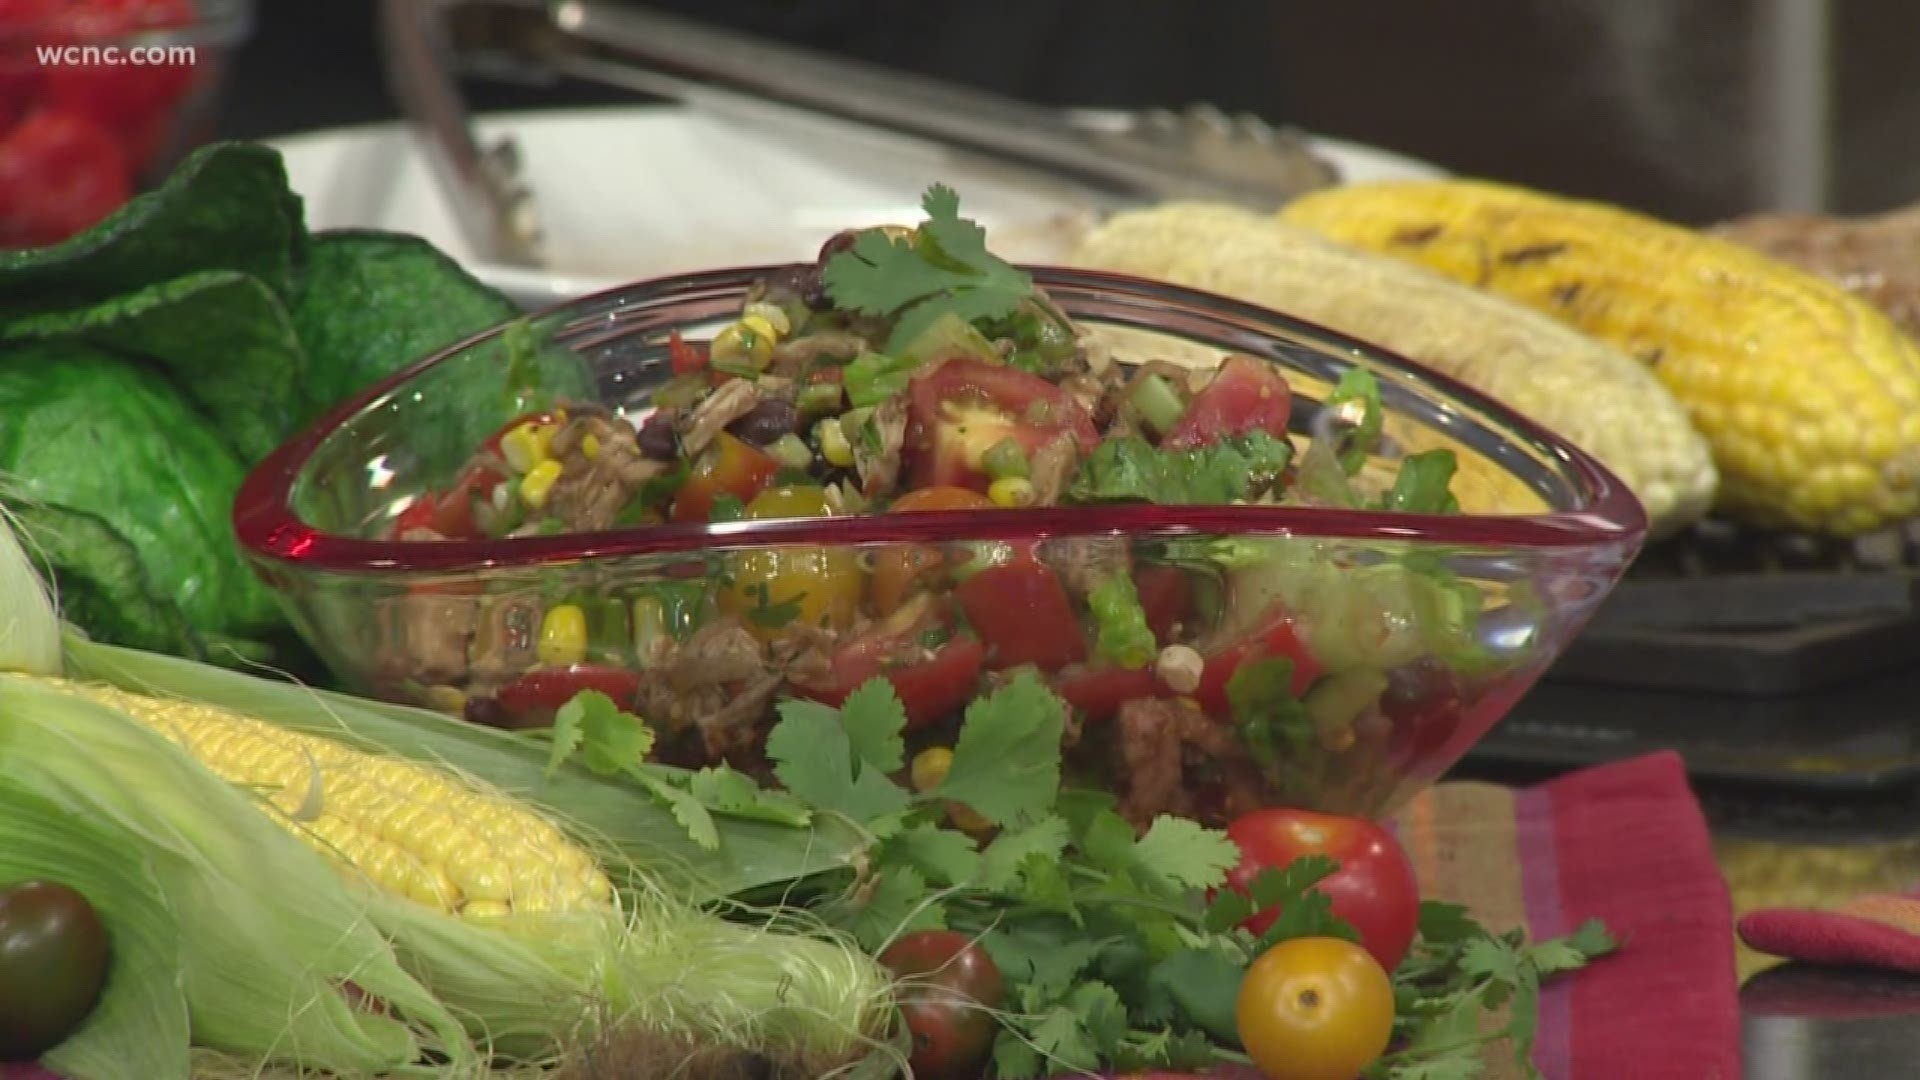 Chef Carol Green gives us a recipe for a salad that’s far from boring. Here’s how to make this southwest flavored meal.